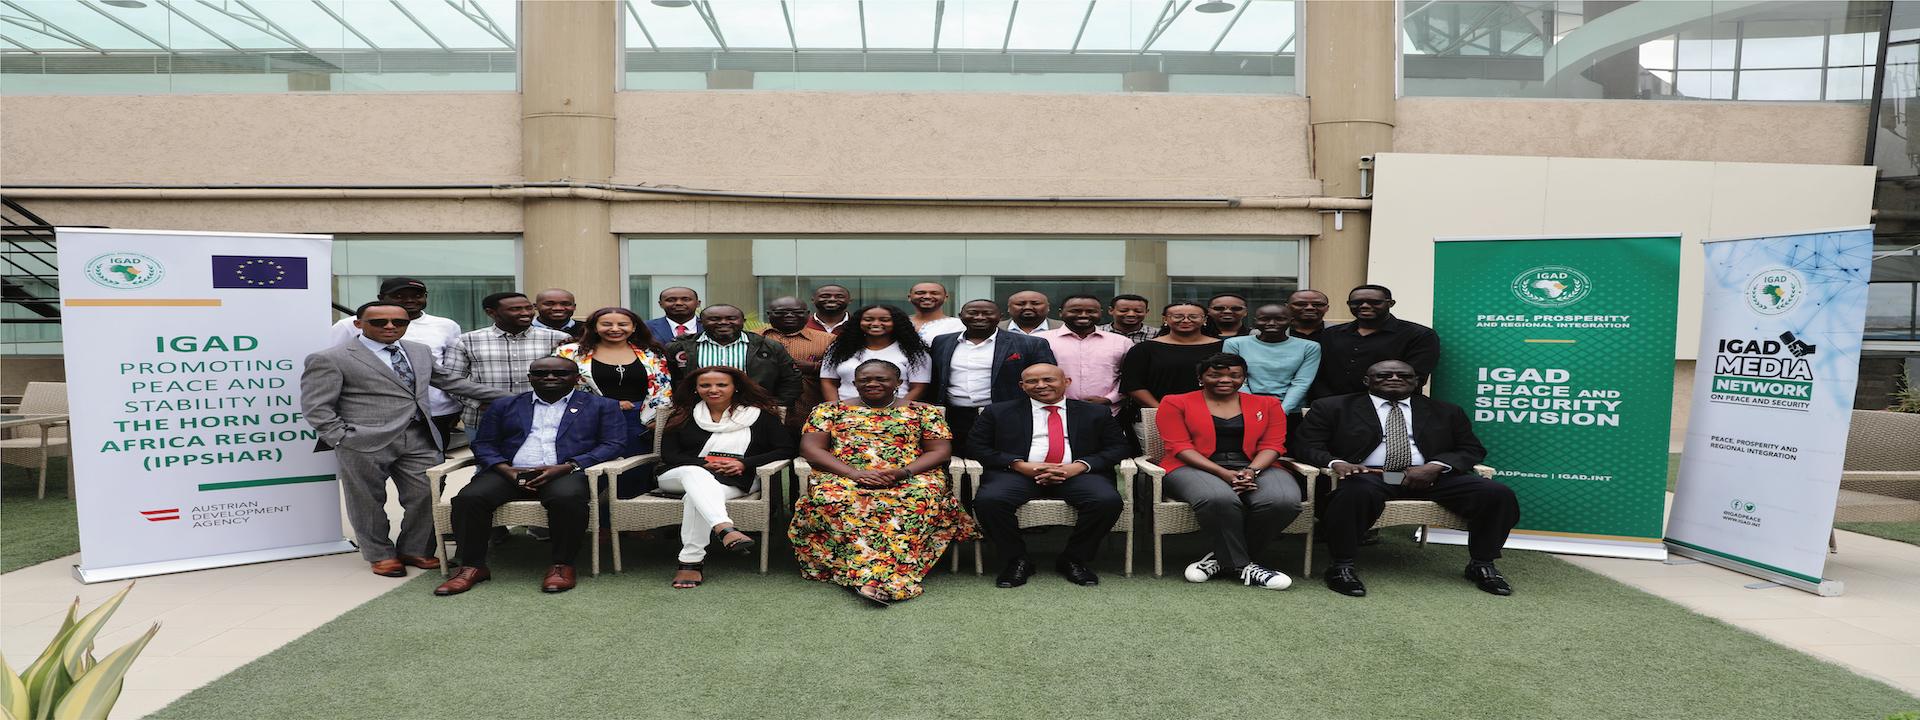 IGAD Media Network Convenes to Promote Credible and Nuanced Reporting of Peace and Security Issues